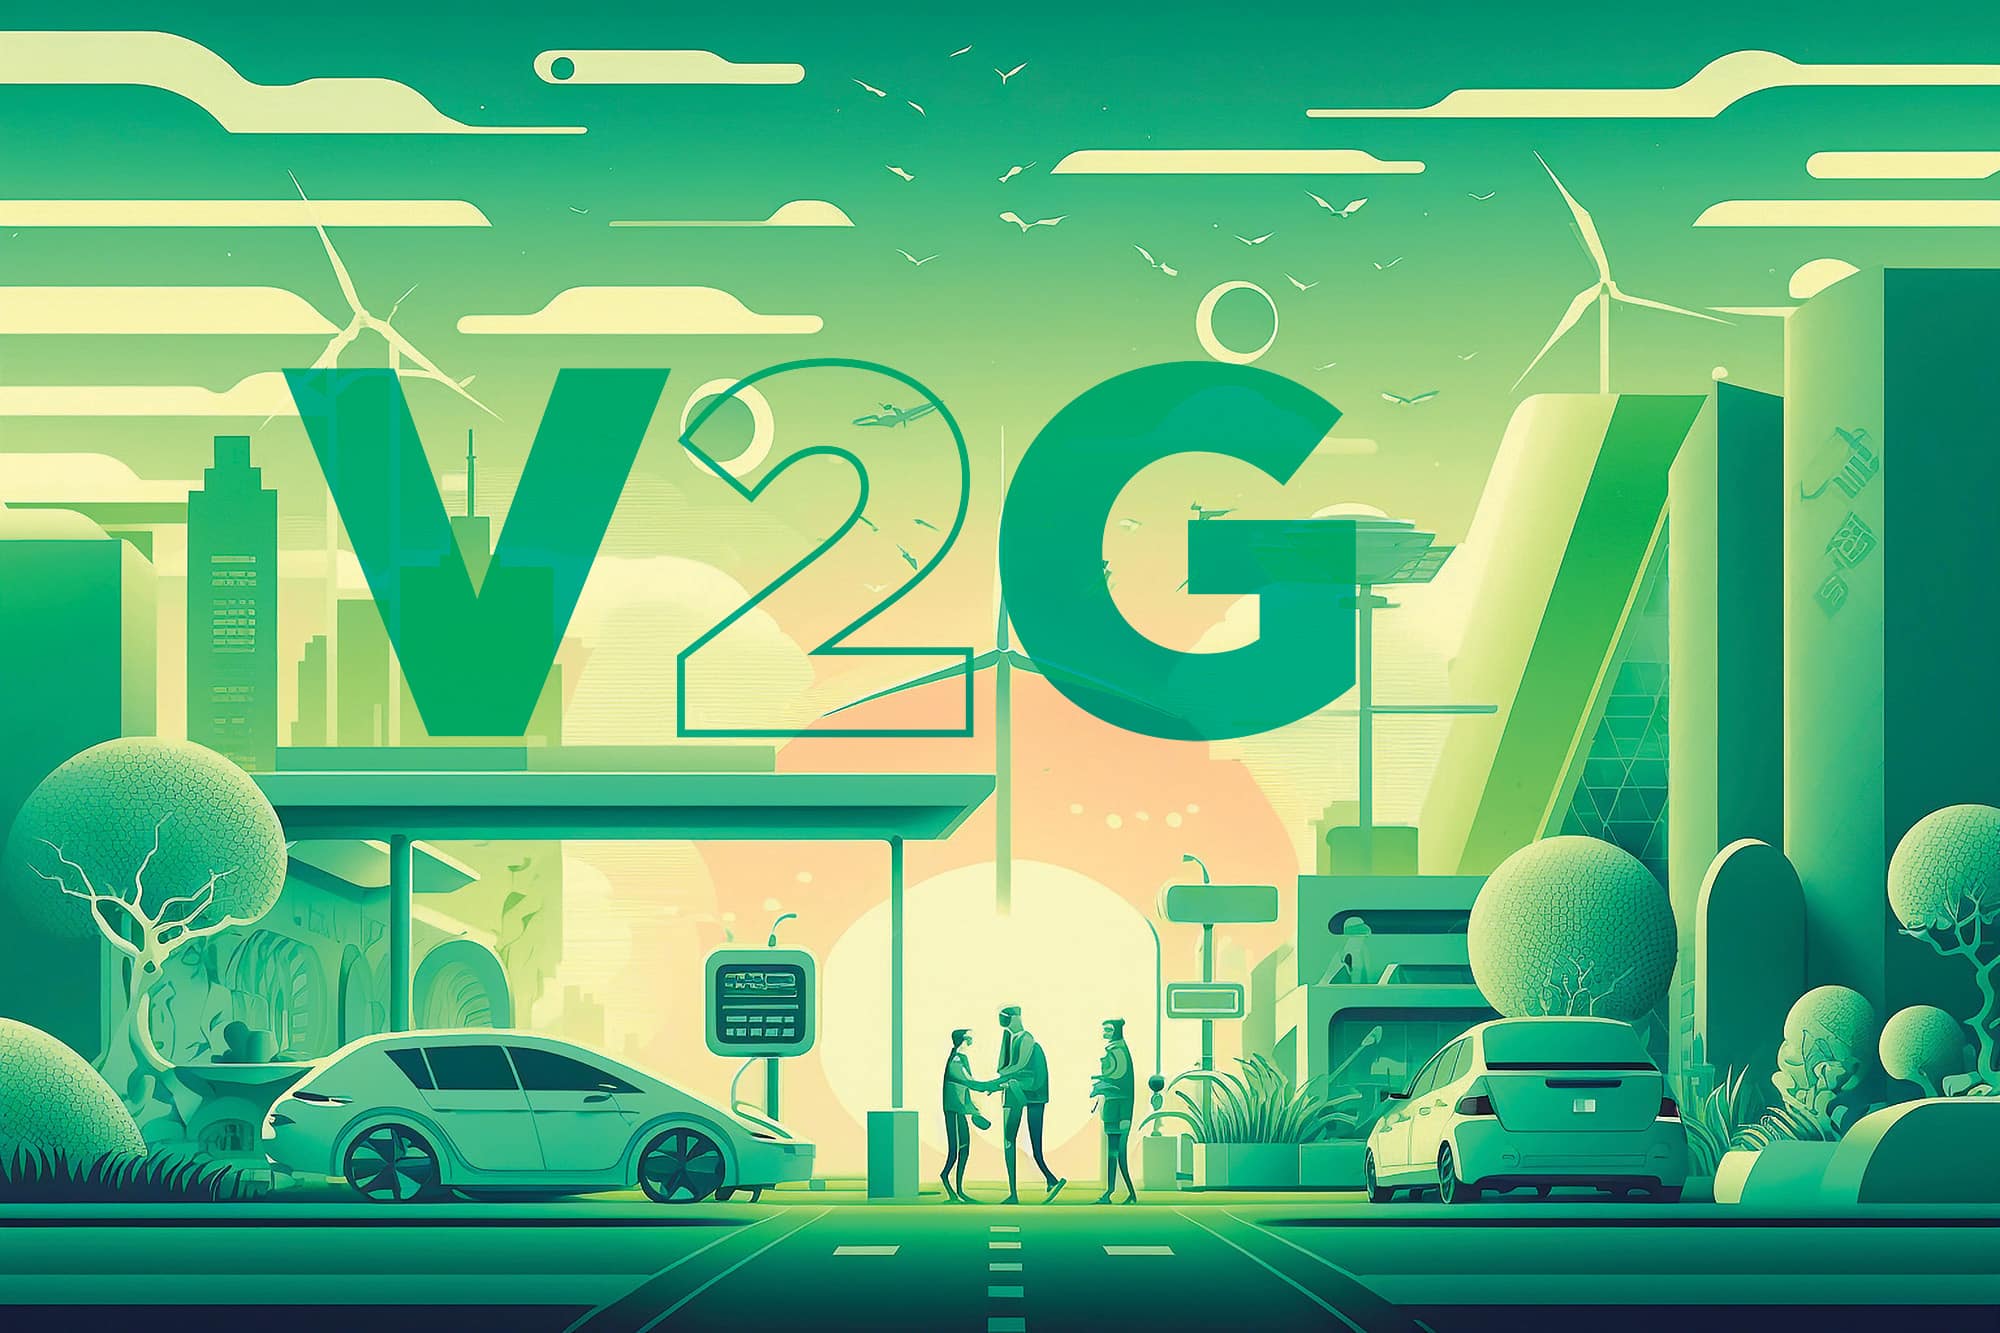 Illustration, with a green/yellow overlay, of a EV cars charging in a environmentally friendly city.